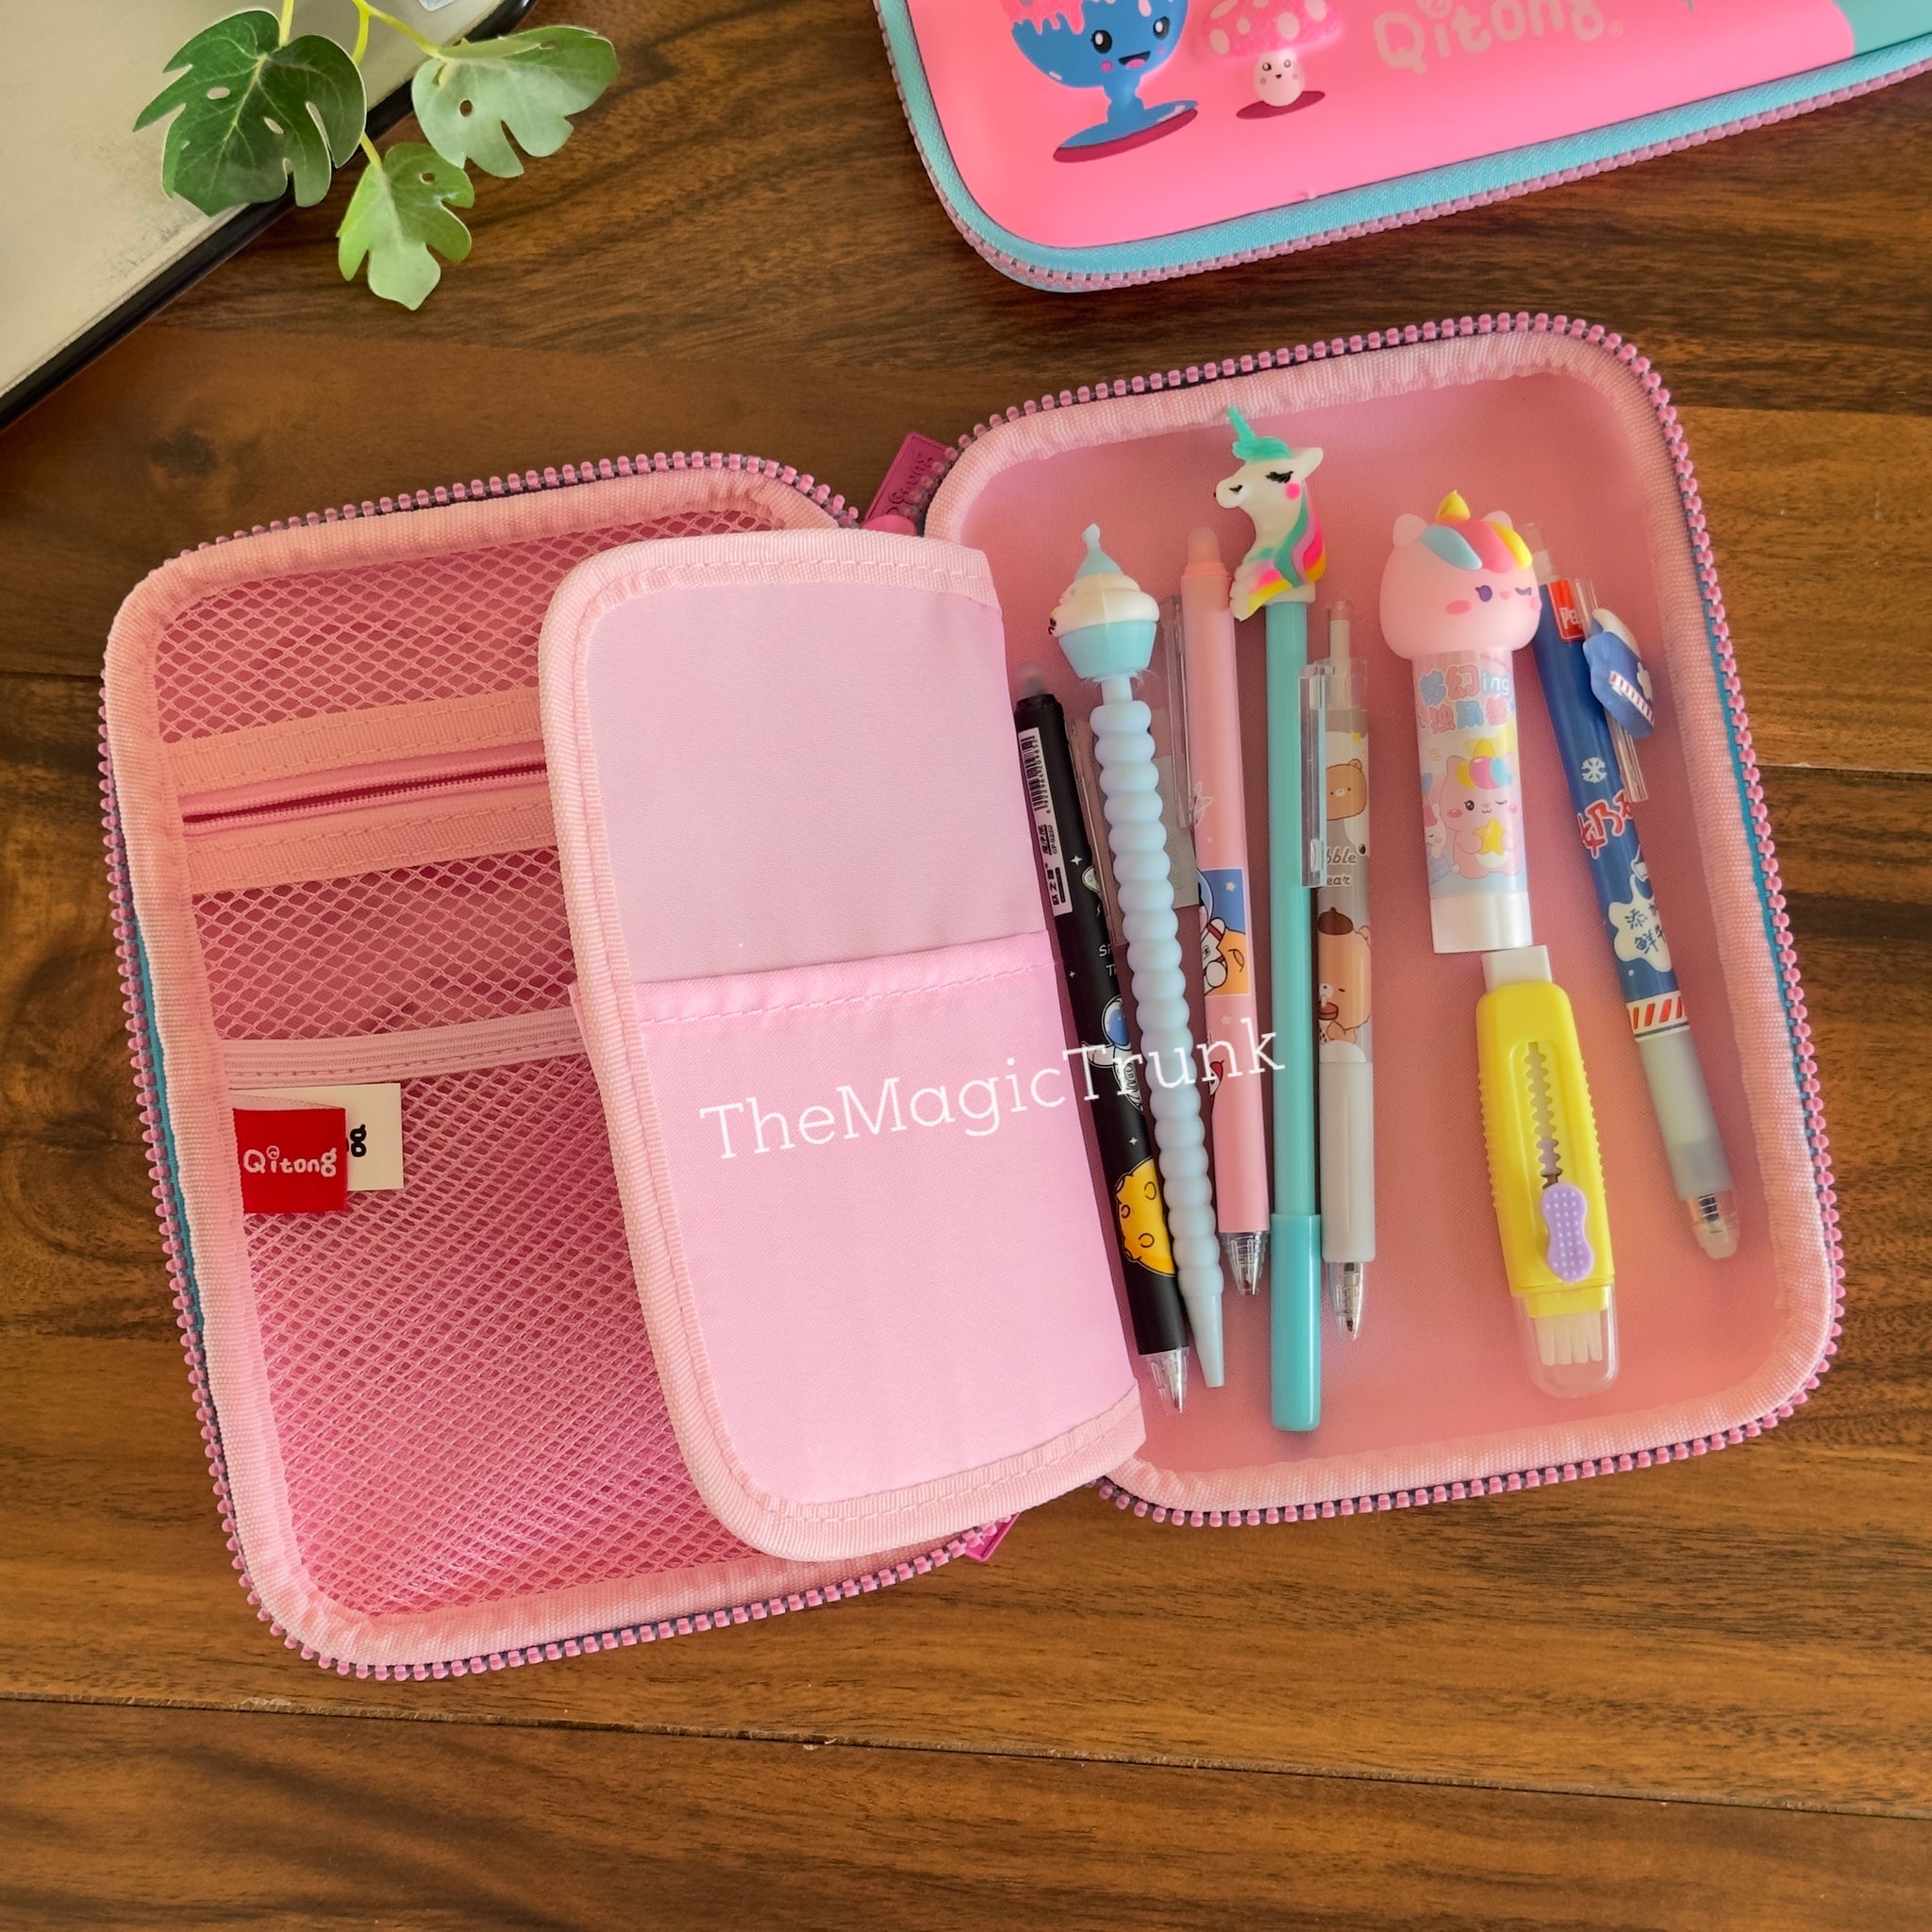 SOOCUTE Unicorn Gifts for Girls Hardtop Pencil Case - Kids Large Colored Pen Holder Box with Compartments - Girls Cosmetic Pouch Bag Stationery